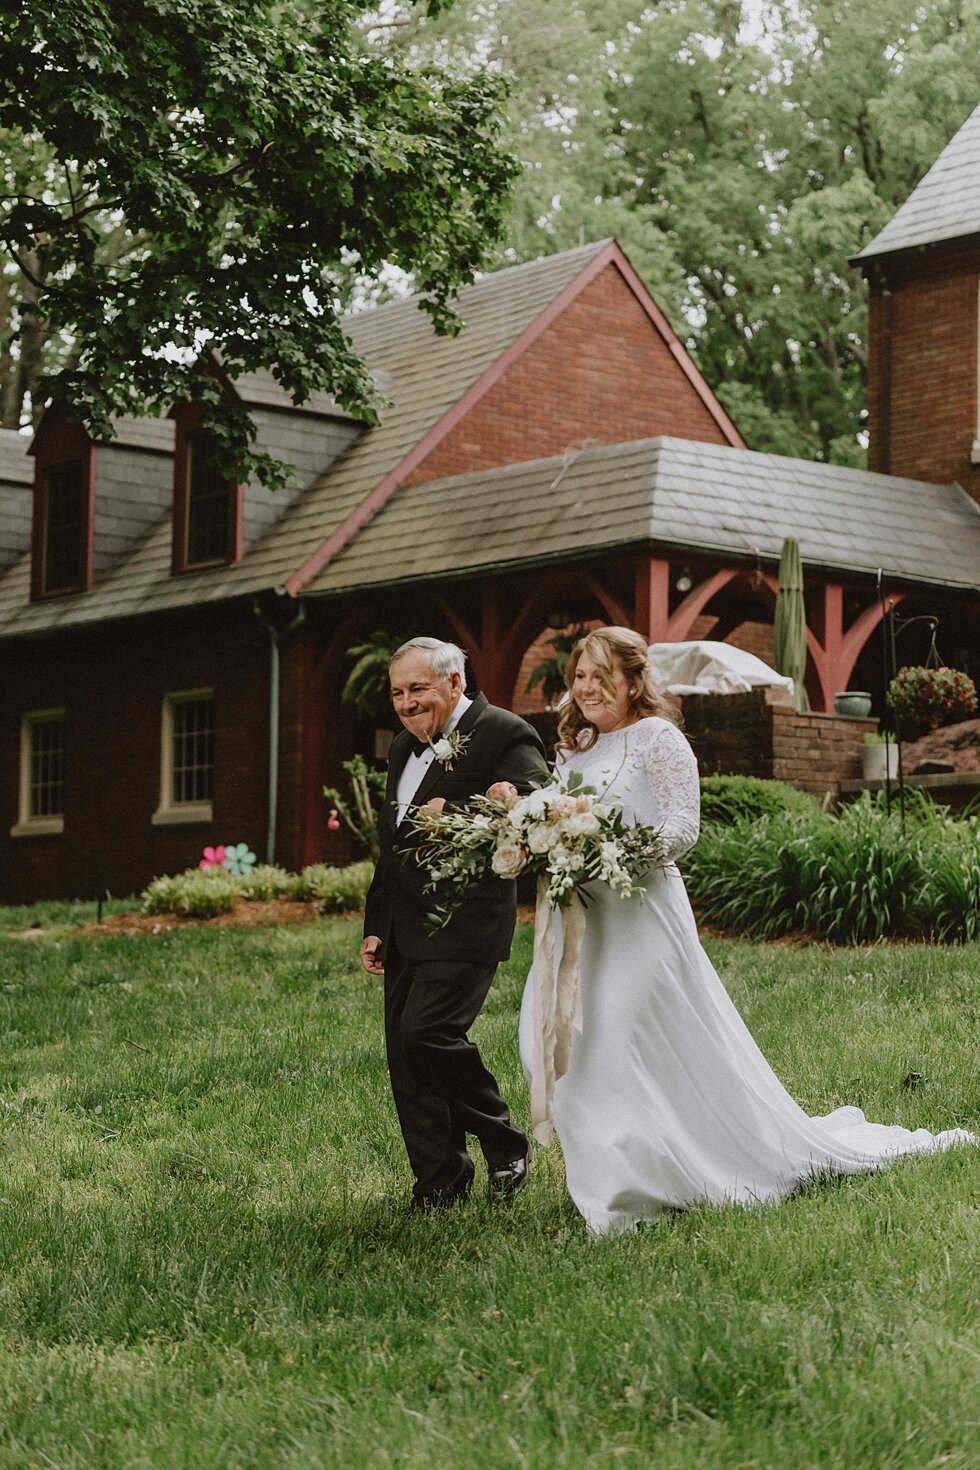  Here comes the bride with the father of the bride. elopement goshen crest farm louisville kentucky elopement photographer simplistic sweet intimate stunning backyard farm wedding #springweddingday #elopement #weddinginspiration #weddingphoto #love #